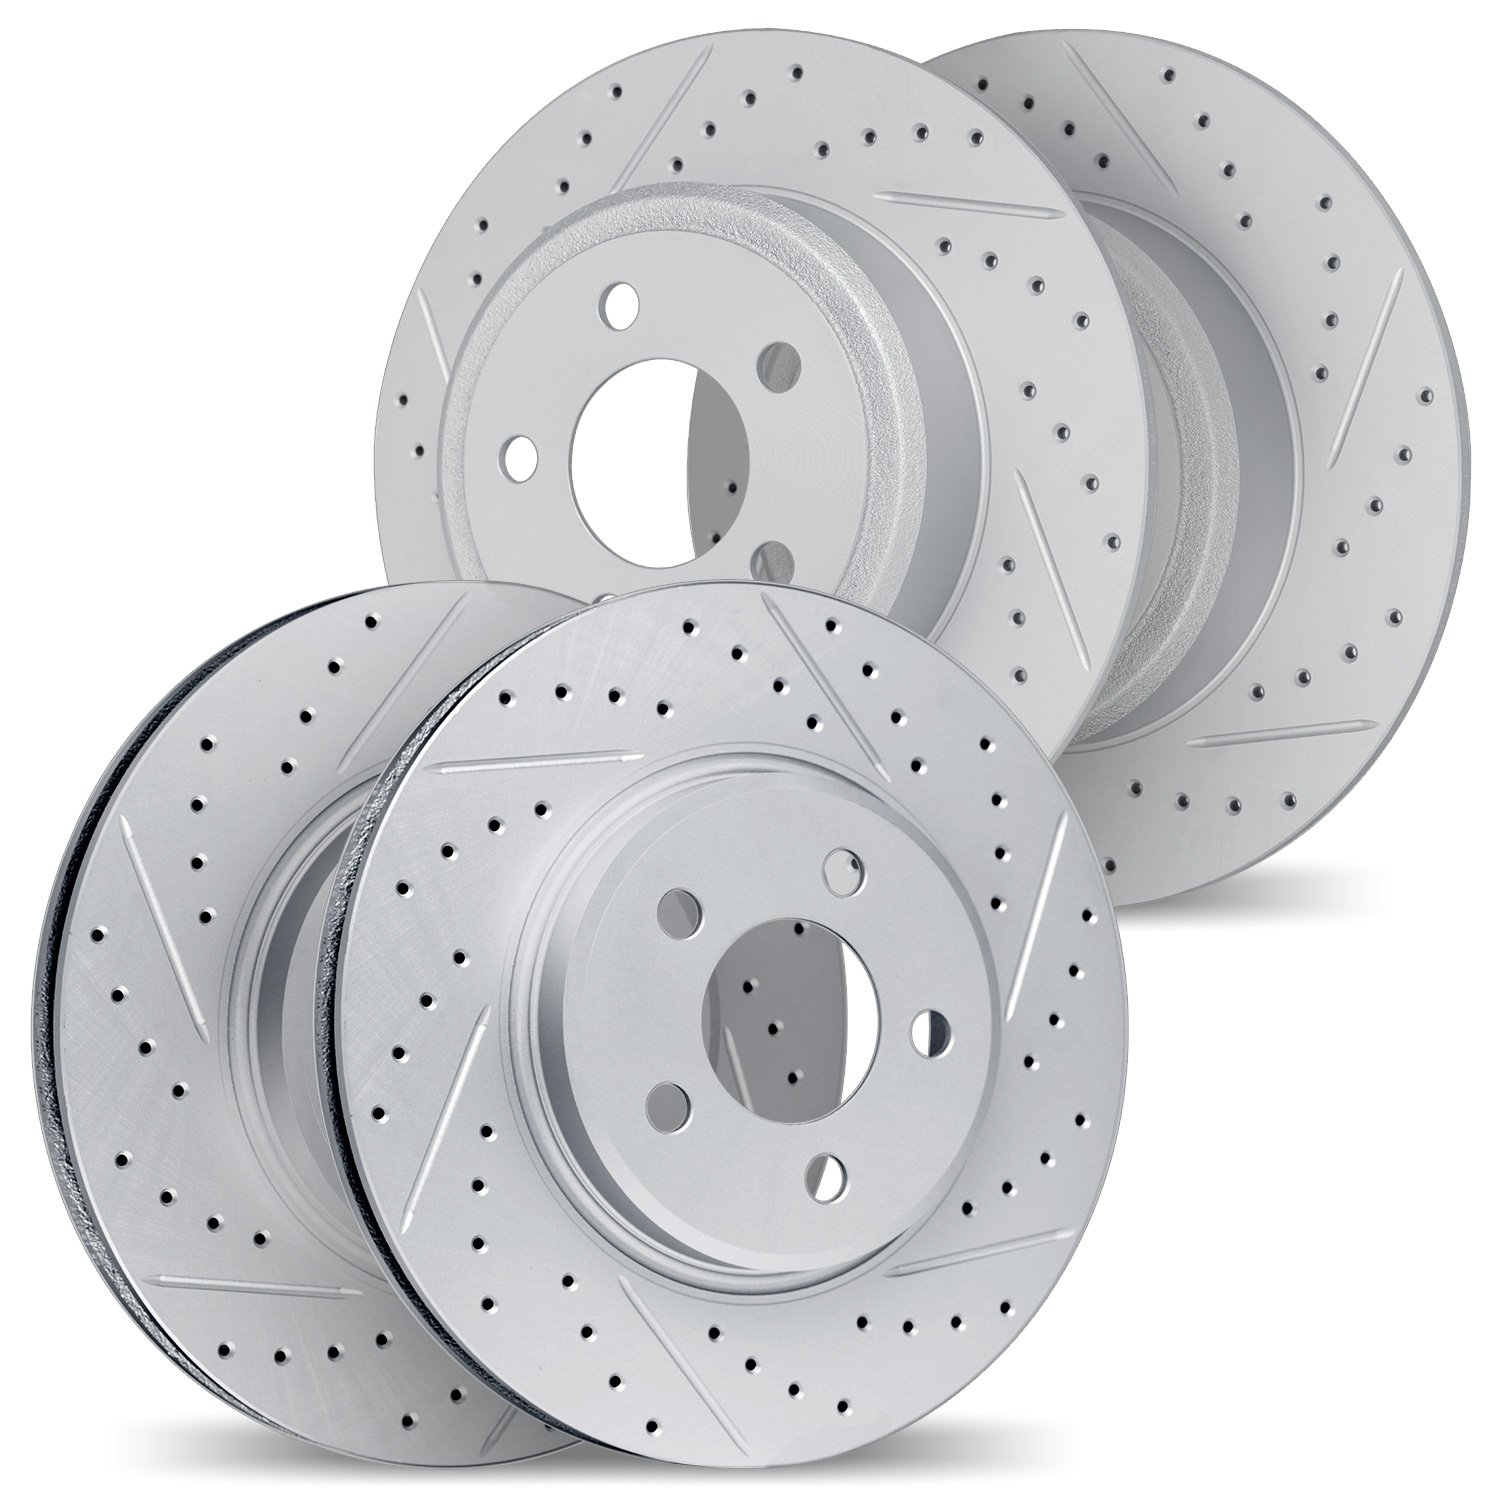 2004-54061 Geoperformance Drilled/Slotted Brake Rotors, 1999-2004 Ford/Lincoln/Mercury/Mazda, Position: Front and Rear